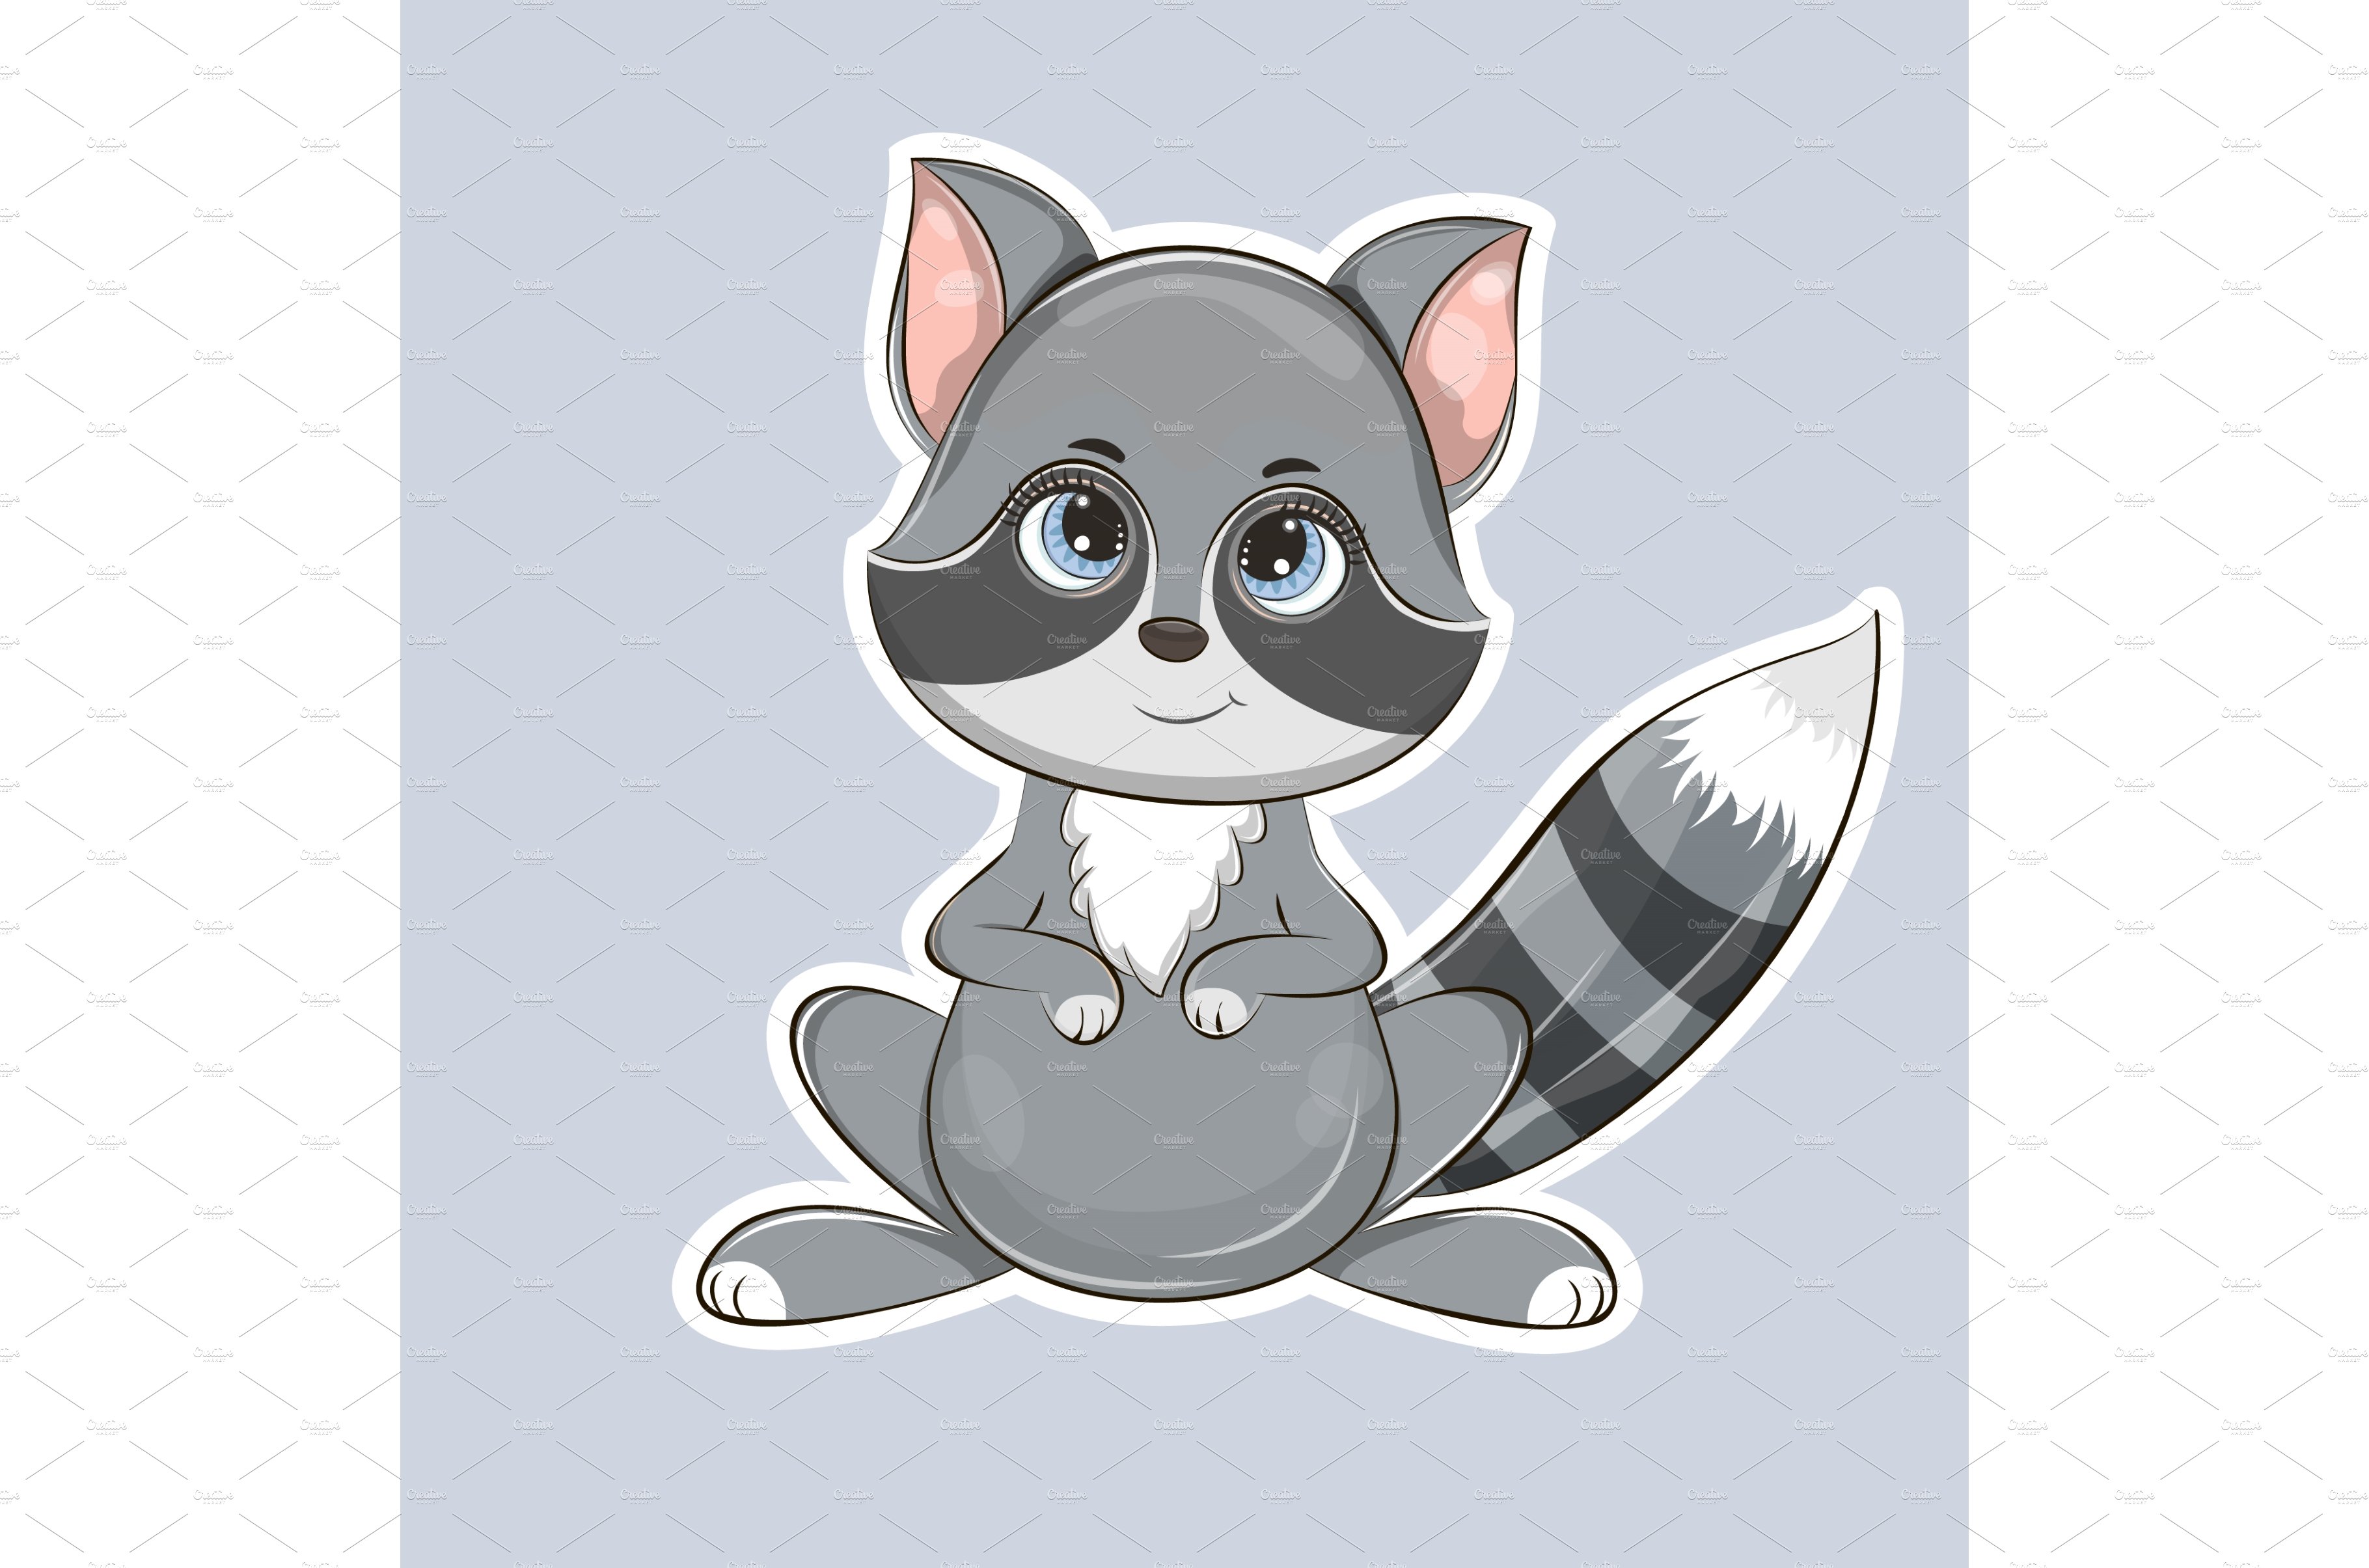 Set Of Cute Raccoon Stickers Stock Illustration - Download Image